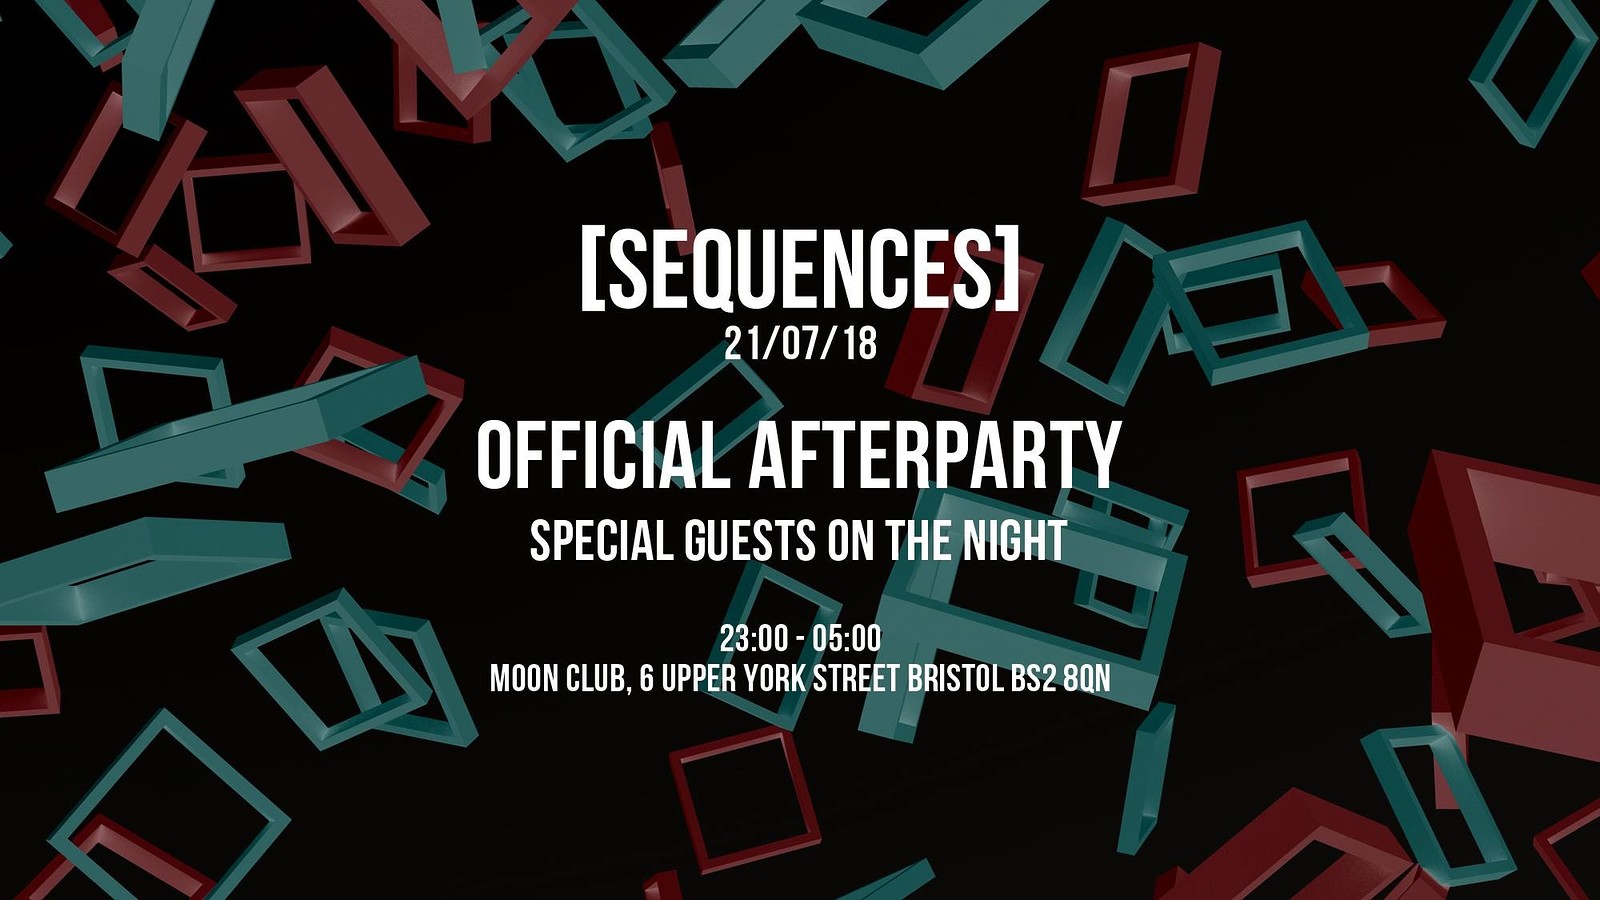 Sequences official afterparty 2018 at Lakota